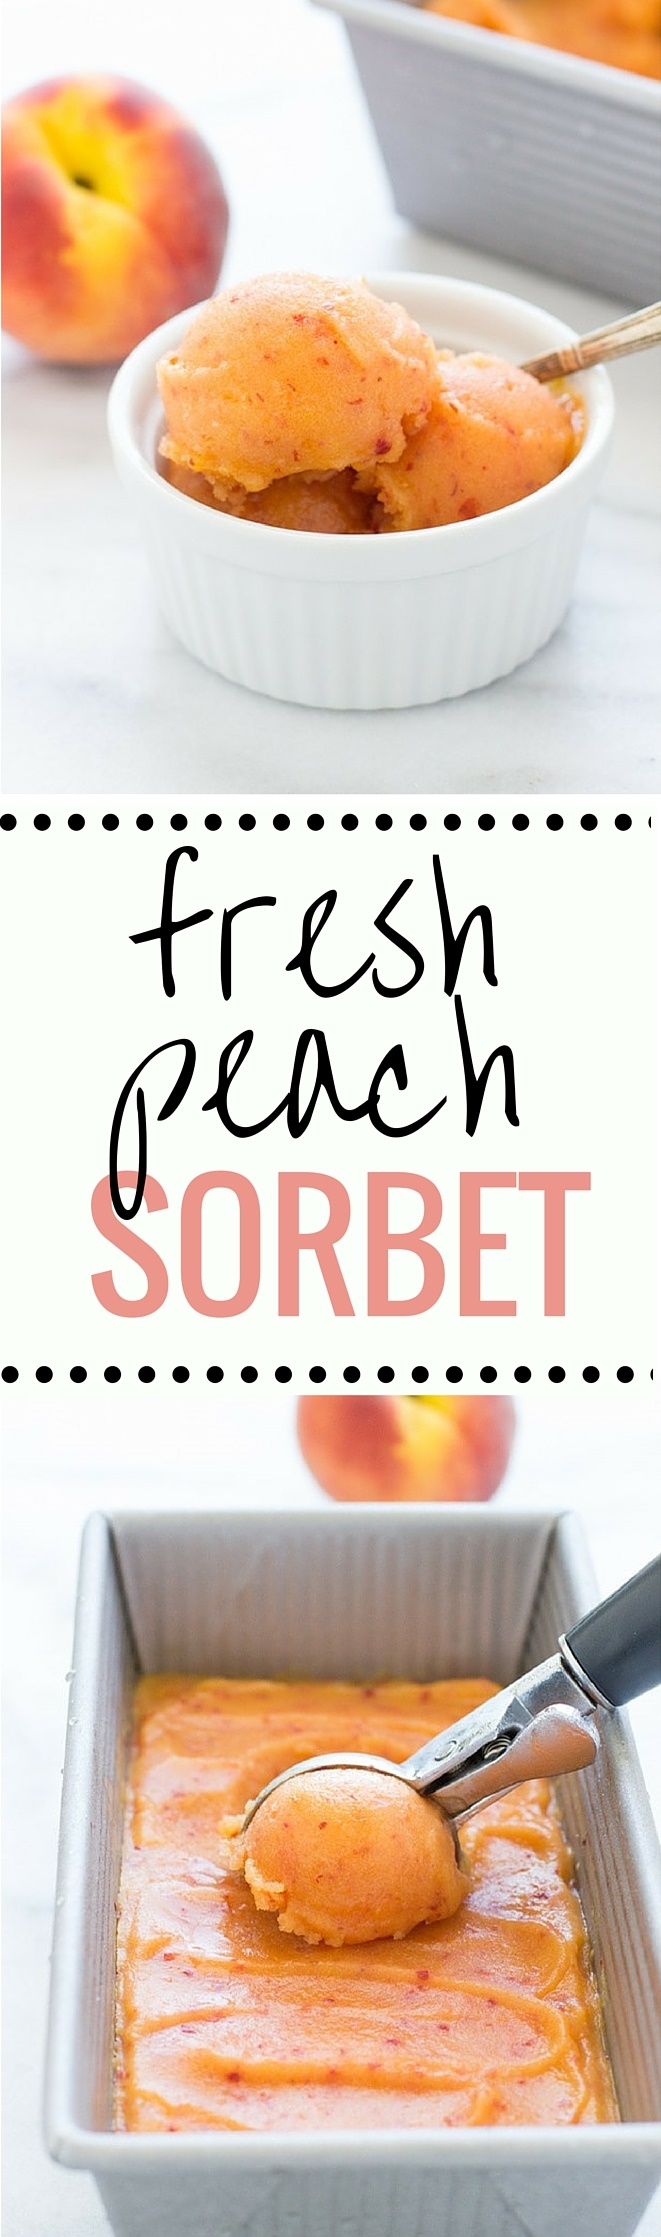 No Churn Fresh Peach Sorbet- made with just 4 simple ingredients! Dairy-free, refined sugar-free + only 100 calories per serving!